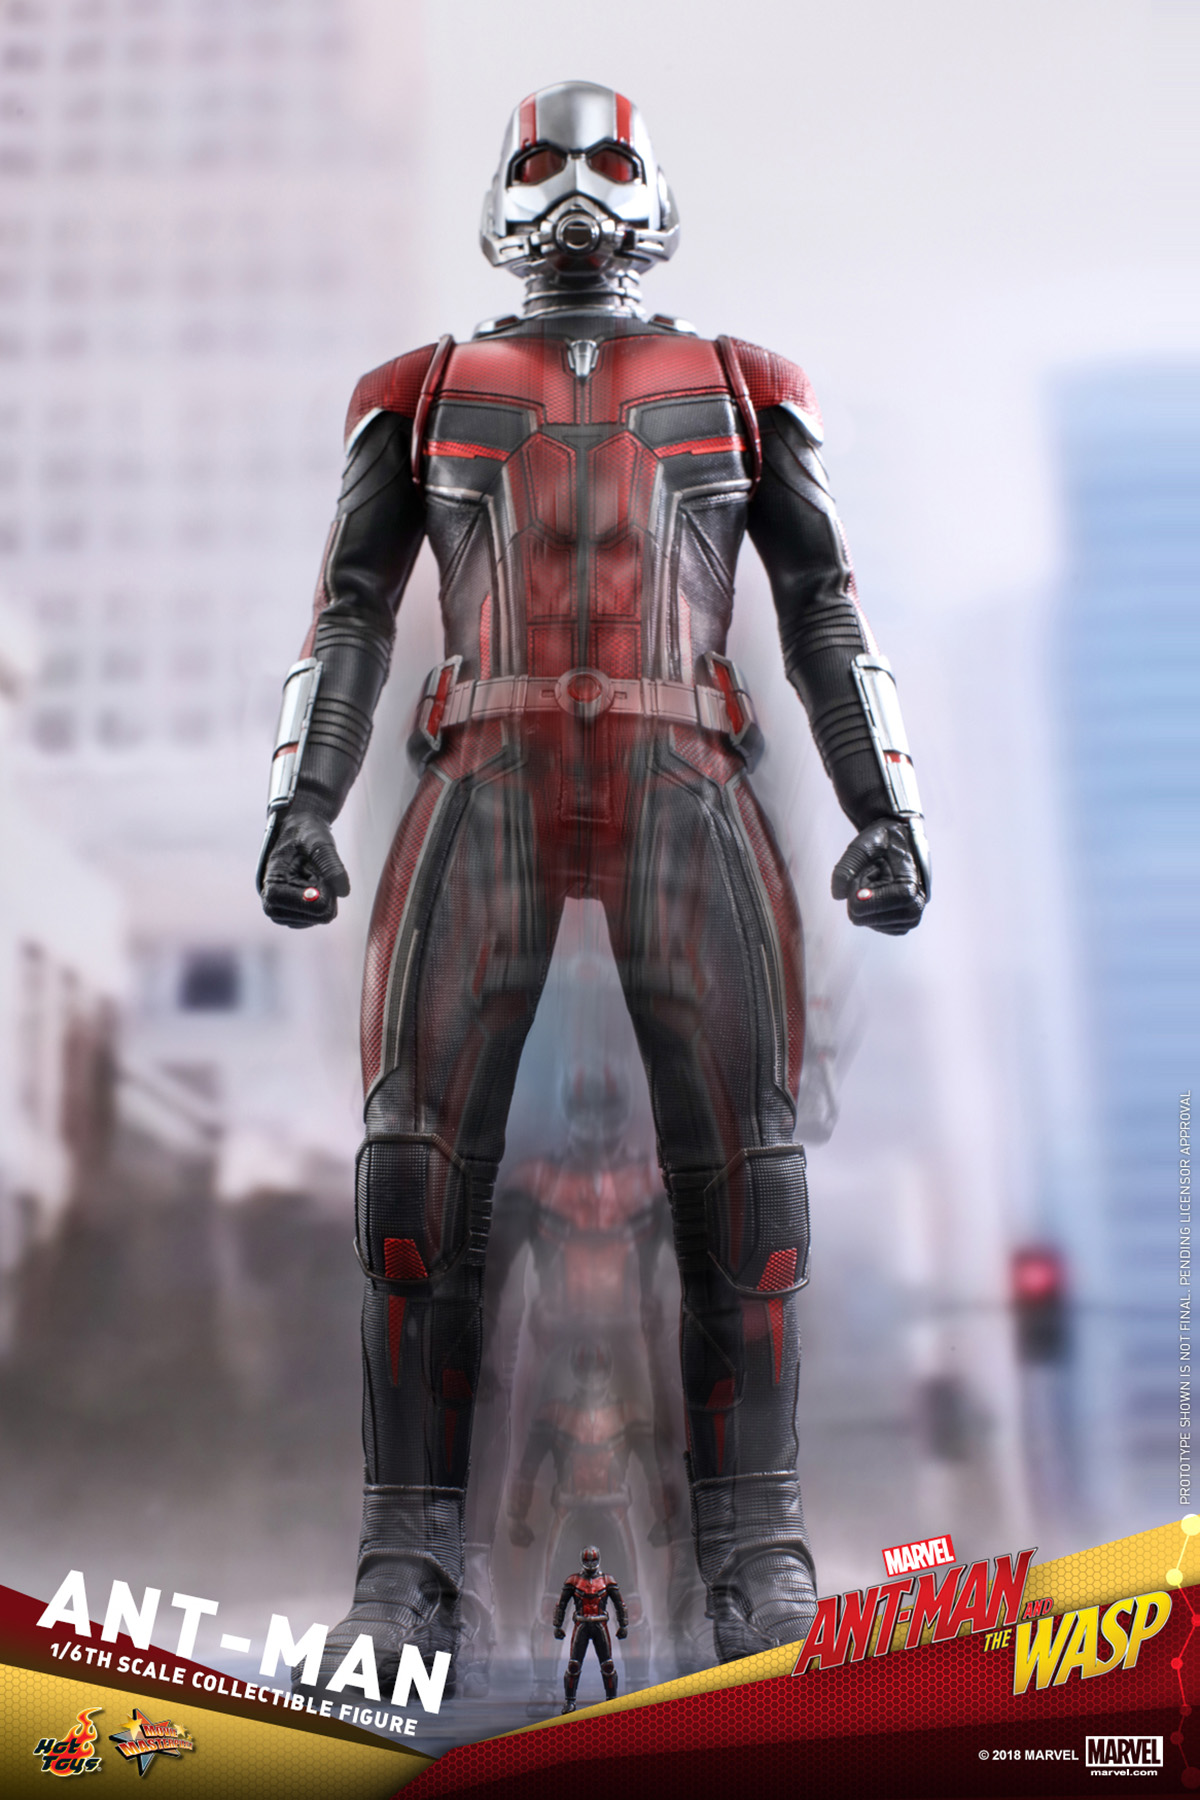 hot-toys-ant-man-and-the-wasp-ant-man-collectible-figure_pr17